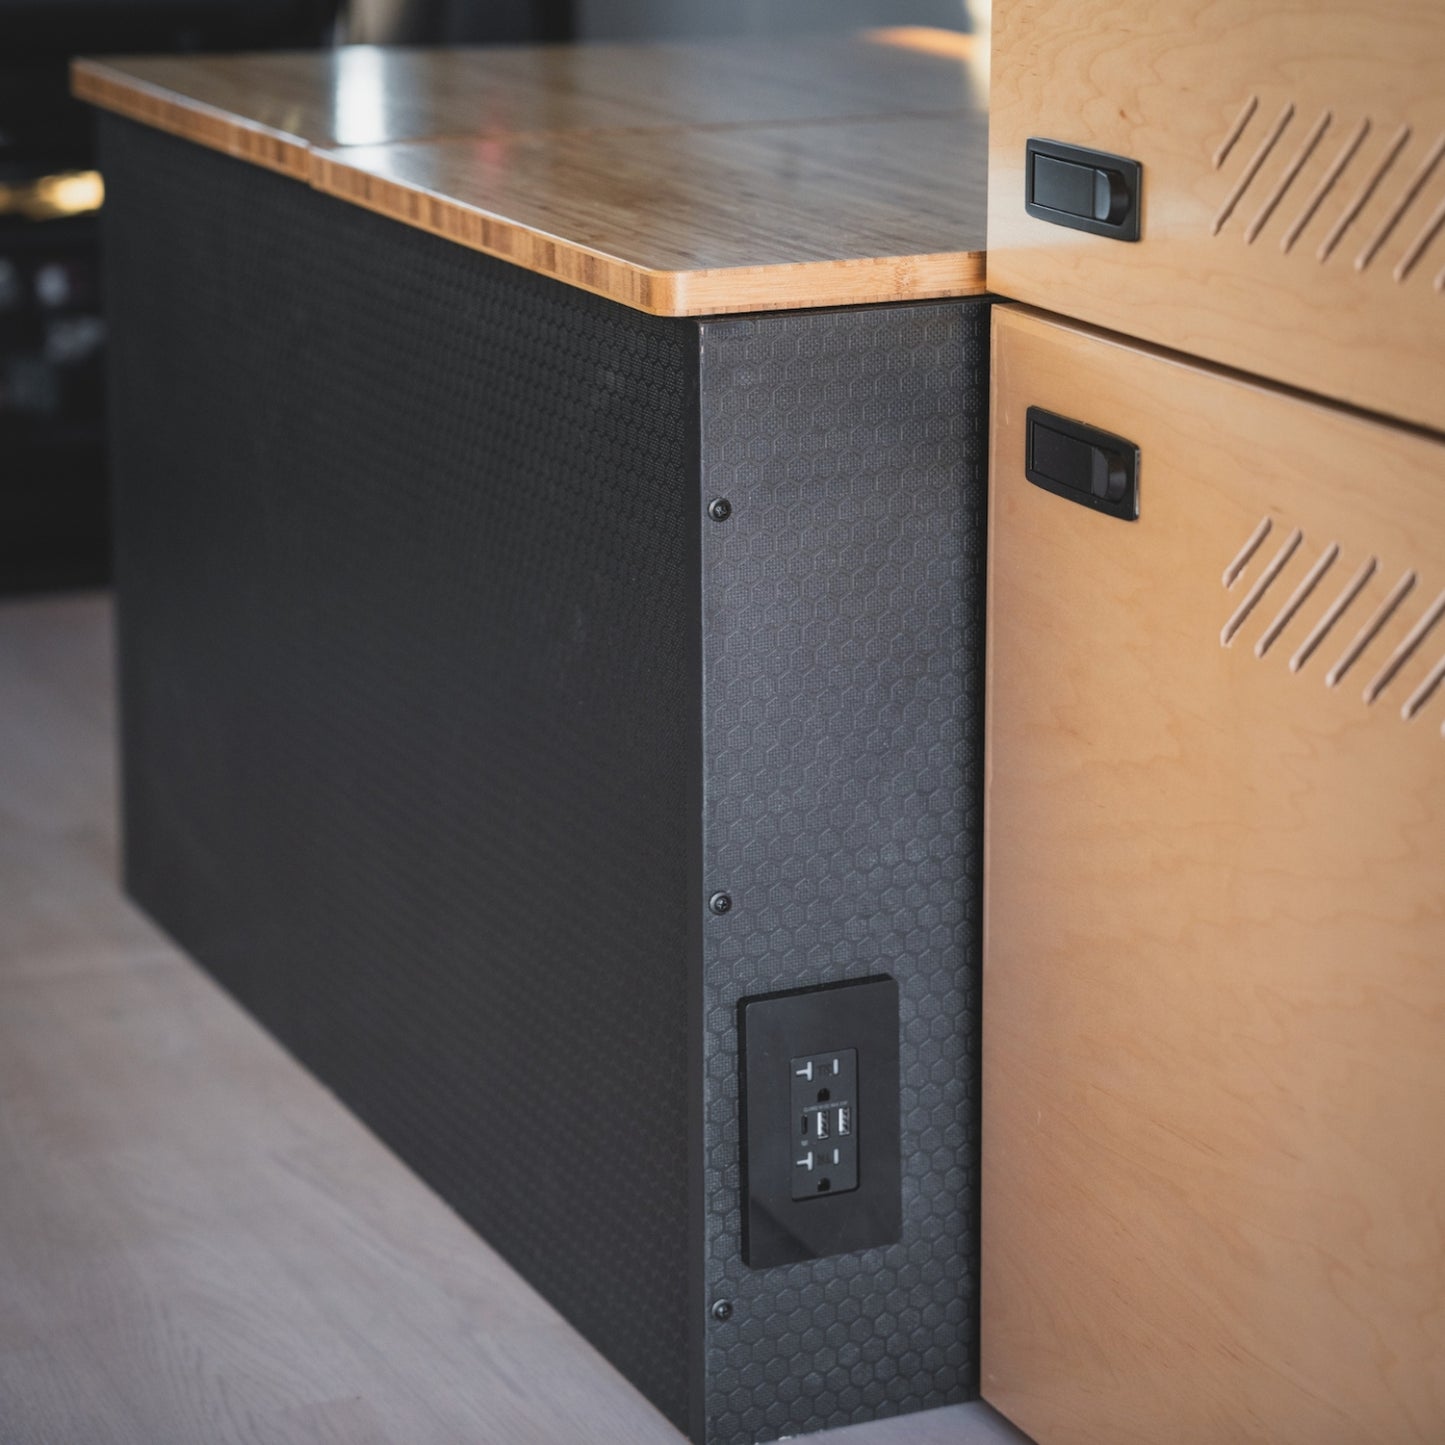 Universal Stealth Bench Cabinet